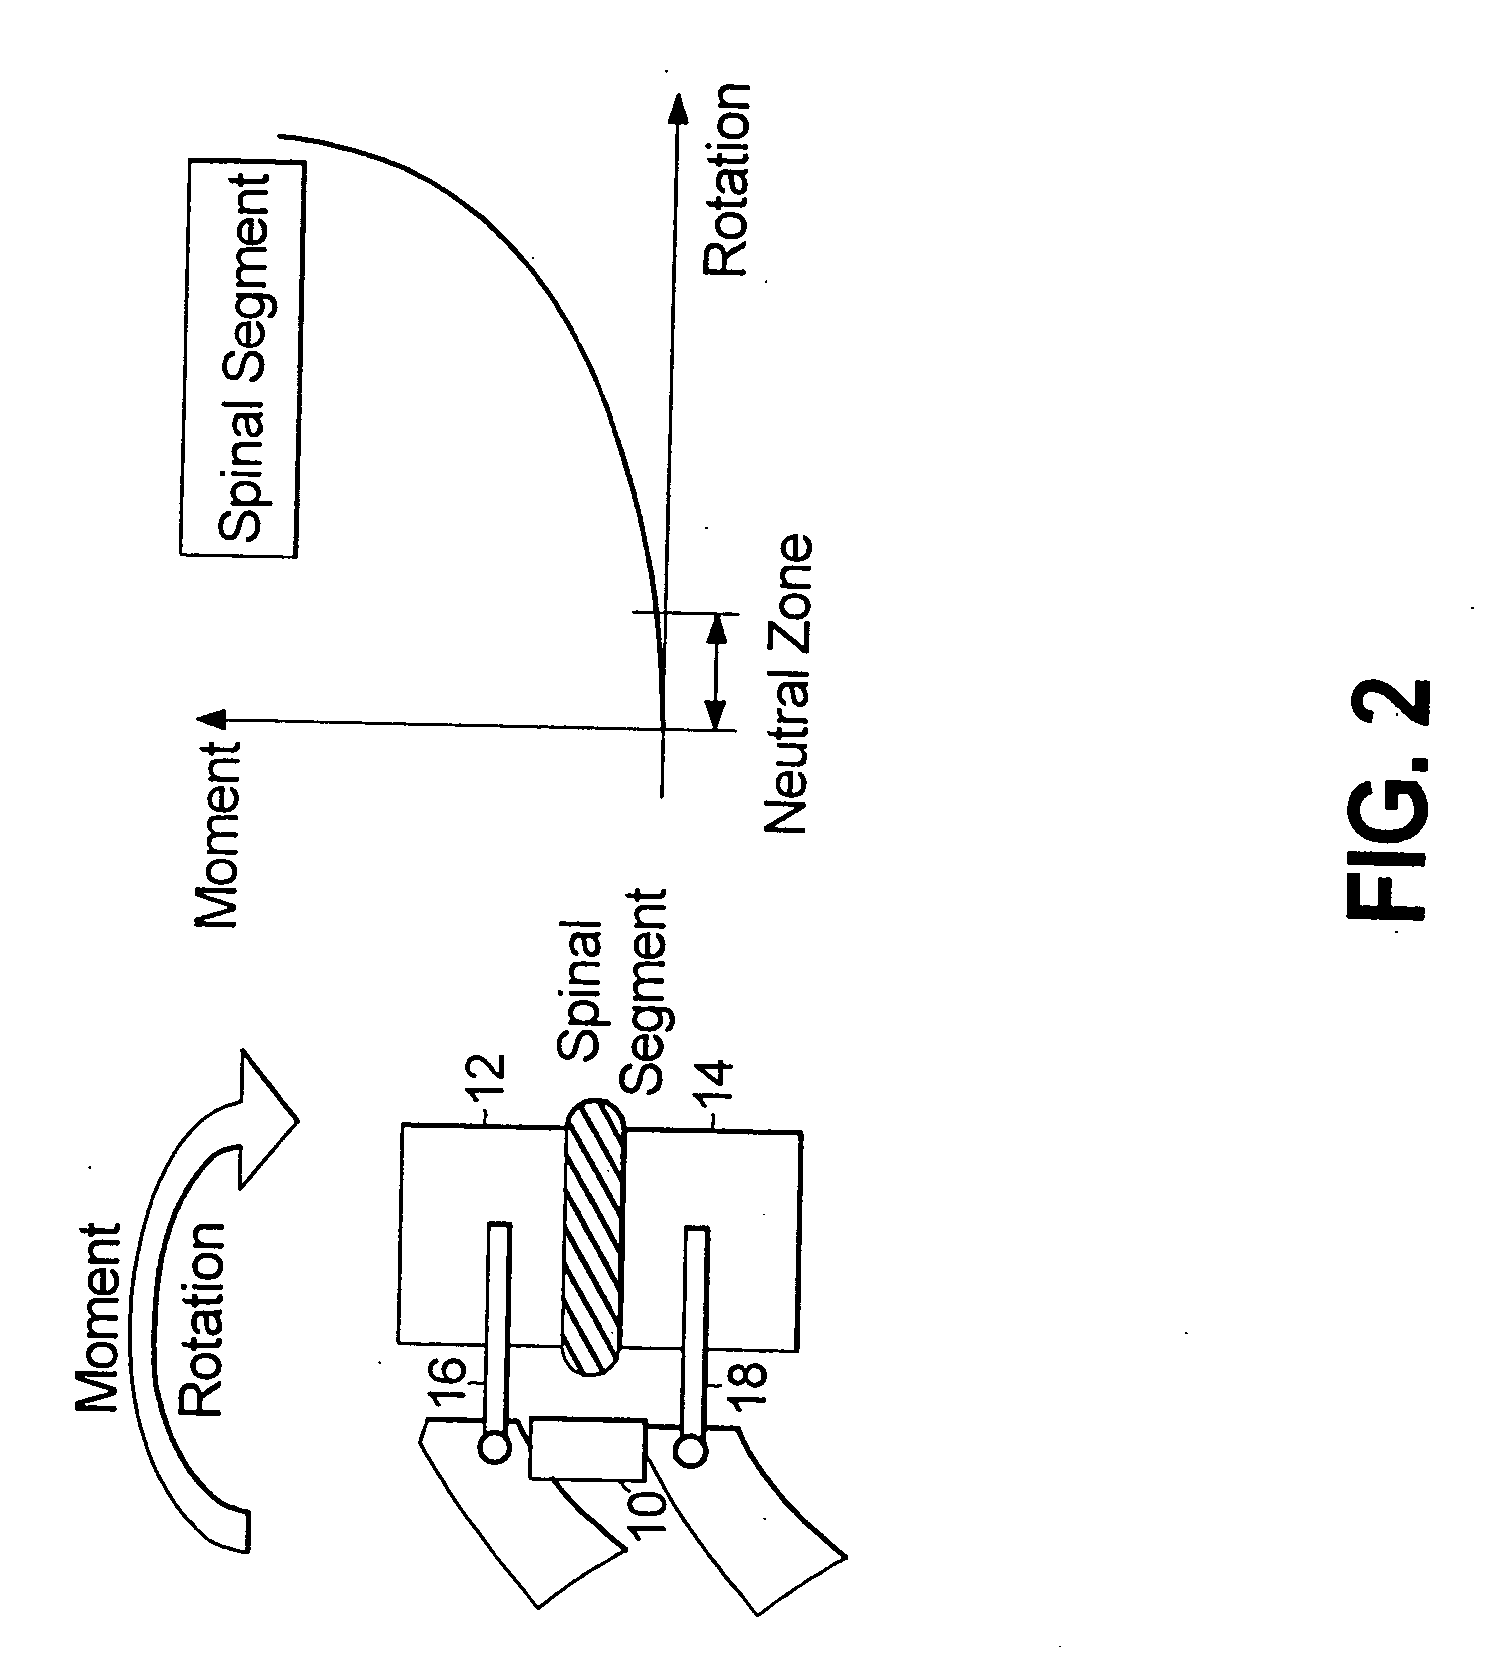 Surgical implant devices and systems including a sheath member